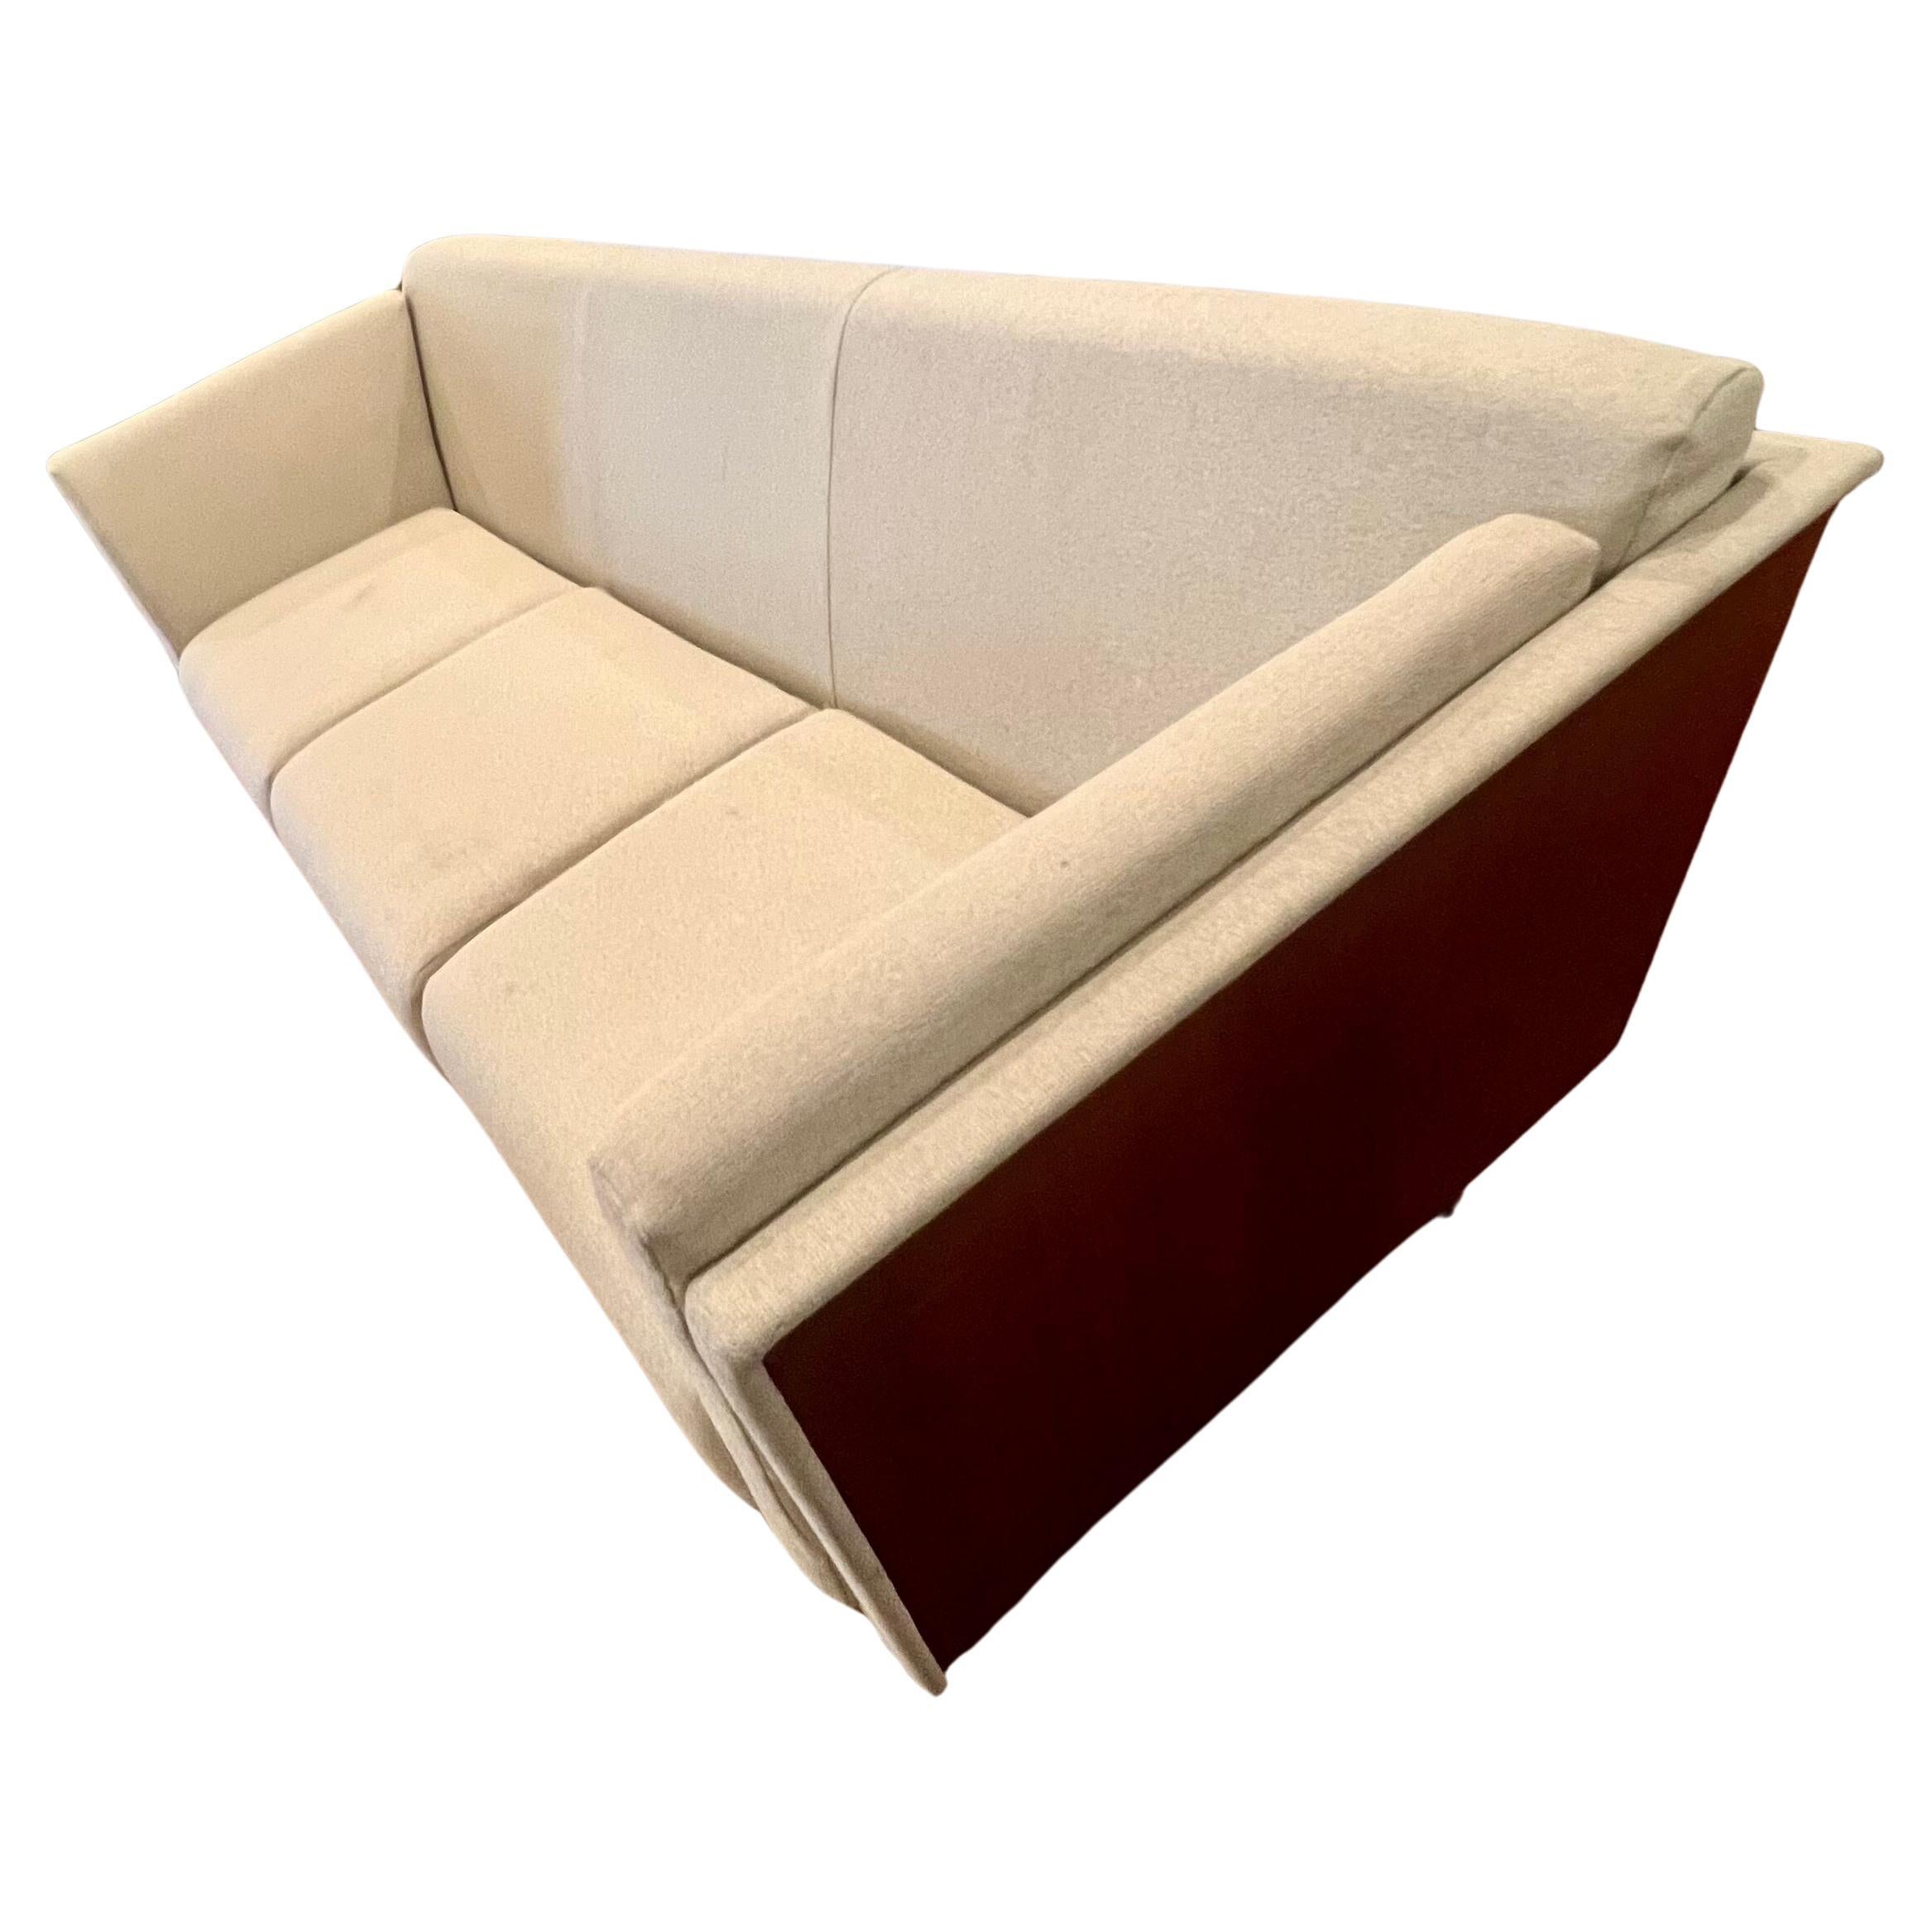 This incredible Goetz sofa by Mark Goetz for Herman Miller features a cherry case, quality upholstery, and aluminum legs. Designed in 1998, some light stains as shown sold AS/IS condition. this piece retails for $10000